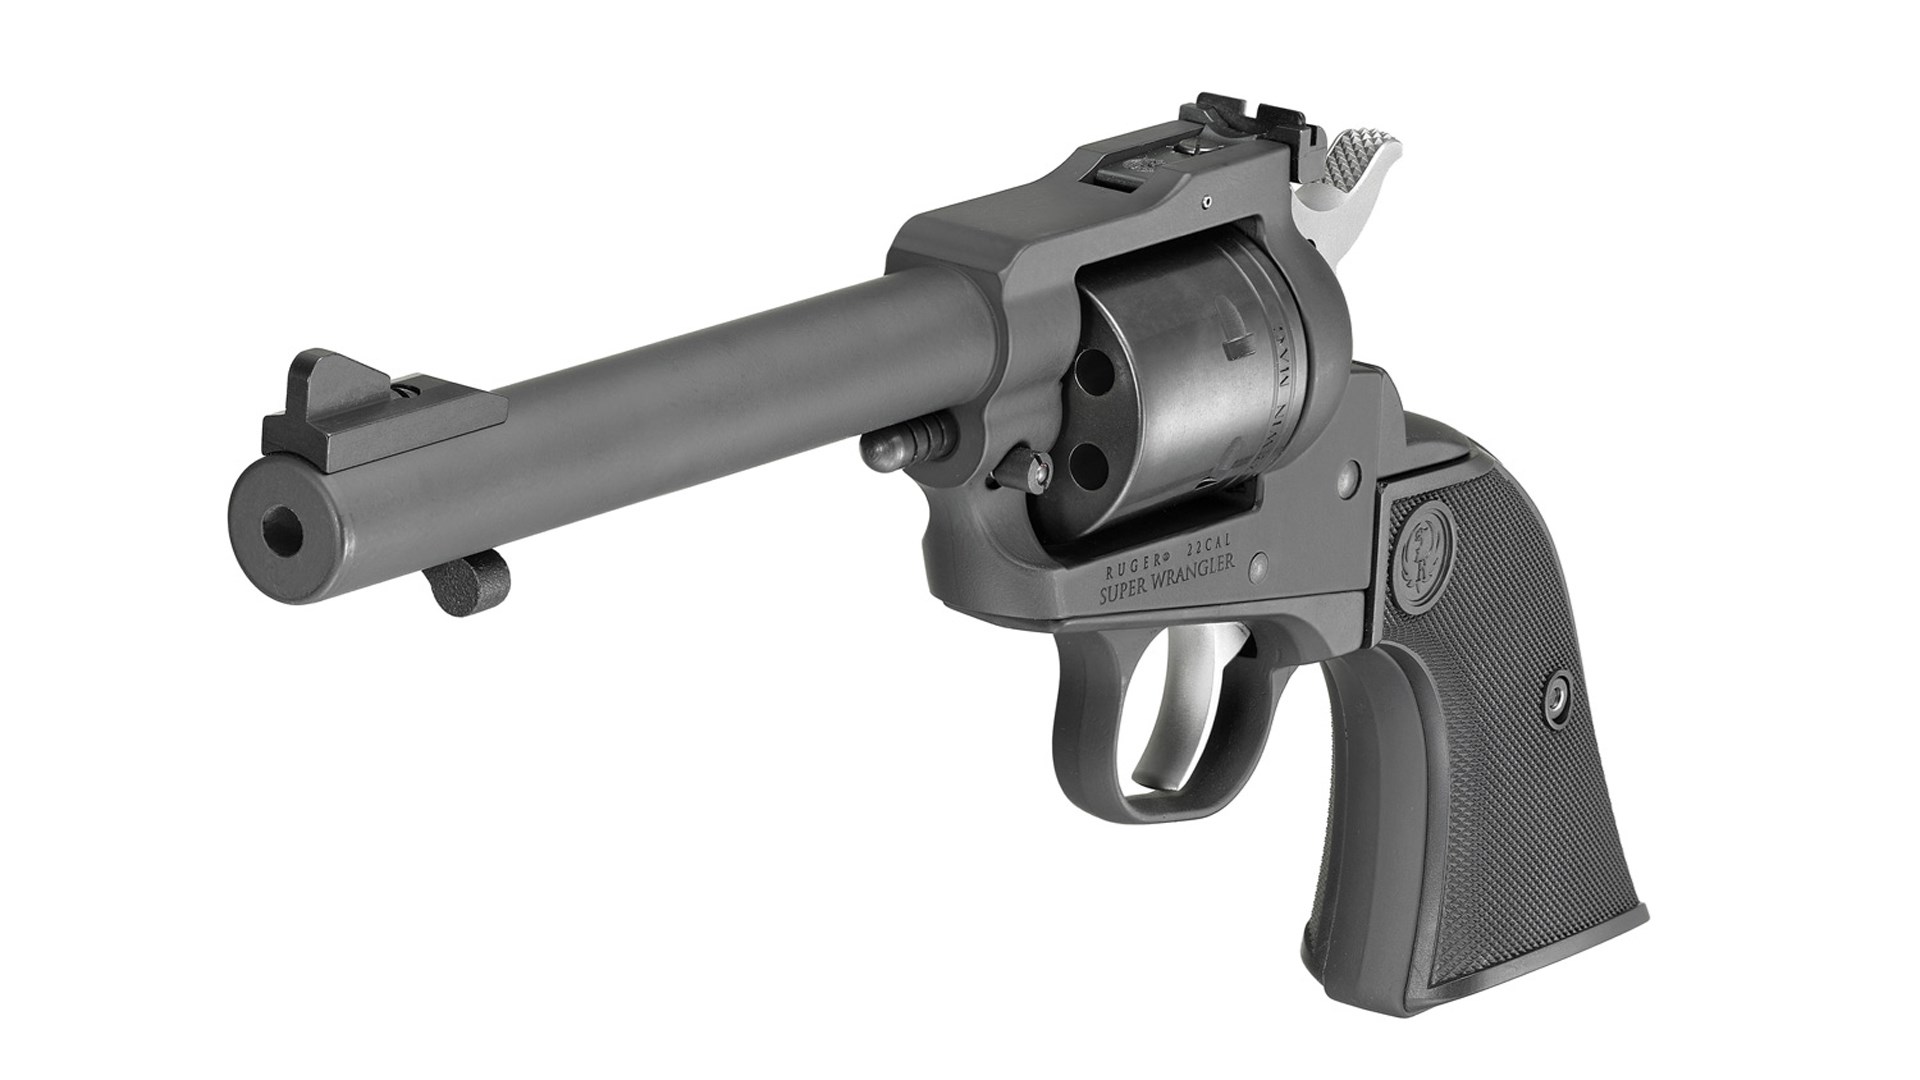 Front and left side of the Ruger Super Wrangler, showing the adjustable sights and the large, black front sight blade.